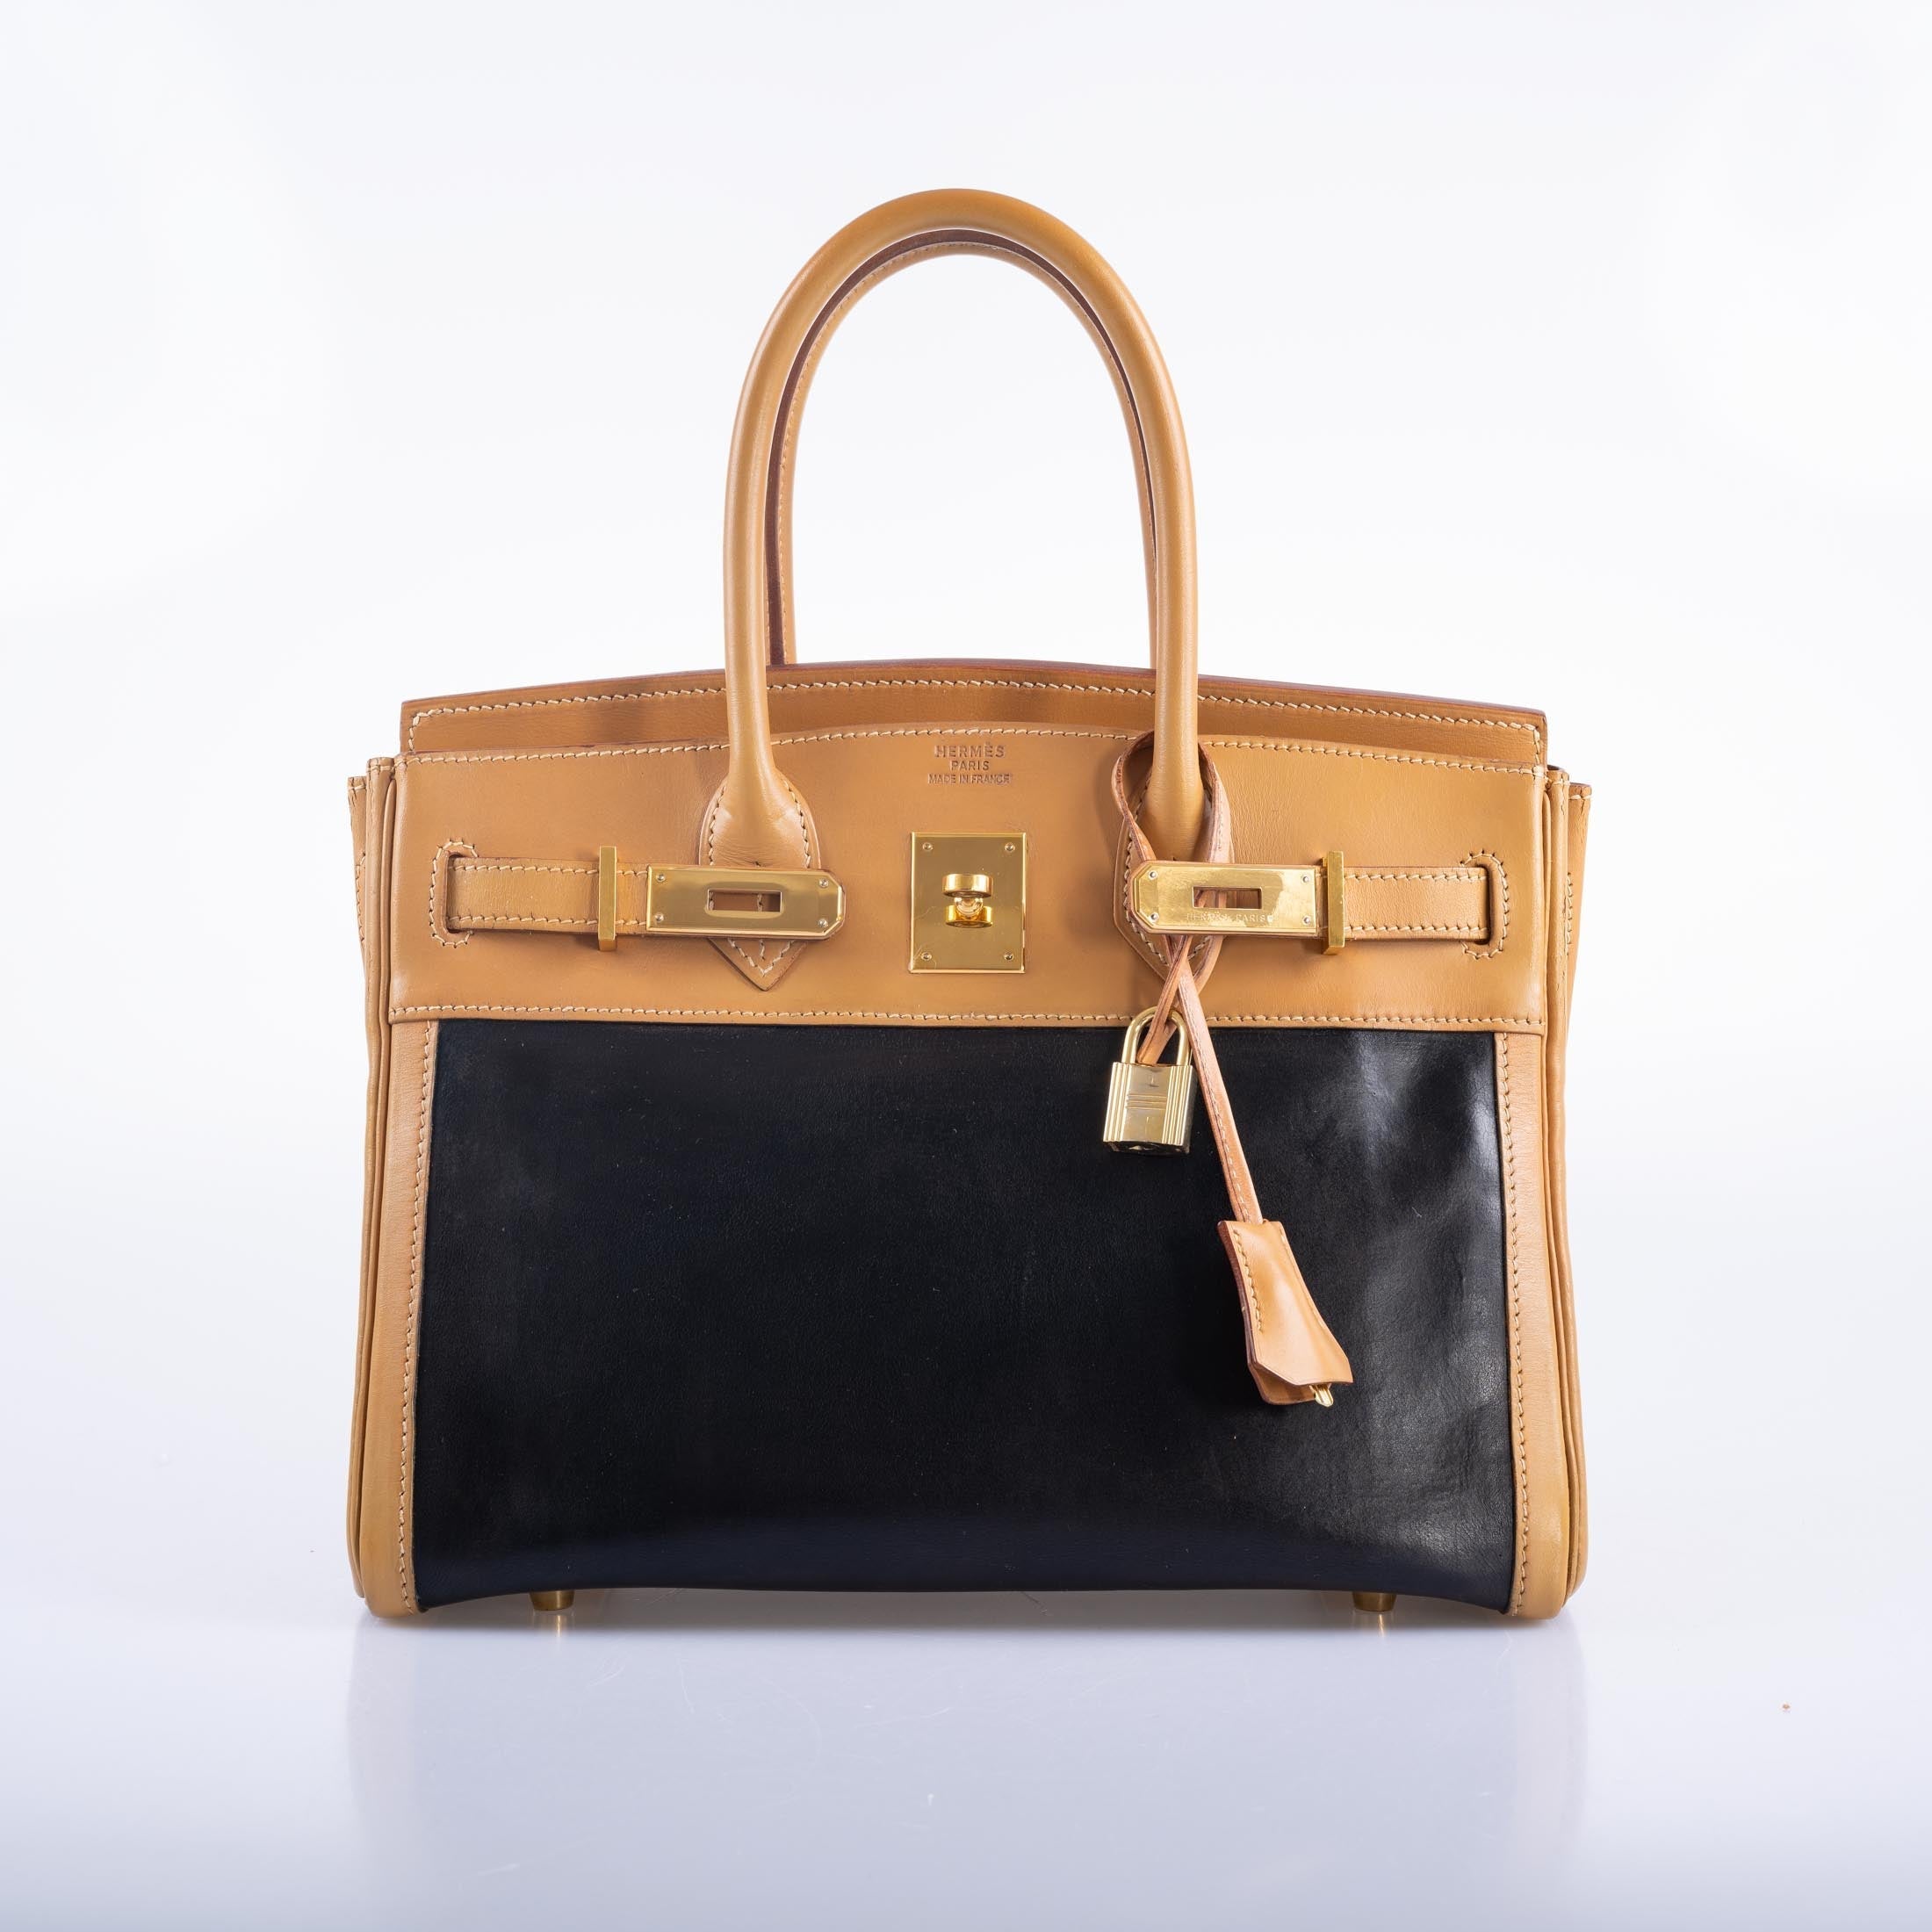 Hermès Birkin 30 Vintage Limited Edition Natural Amazonia with Gold Hardware